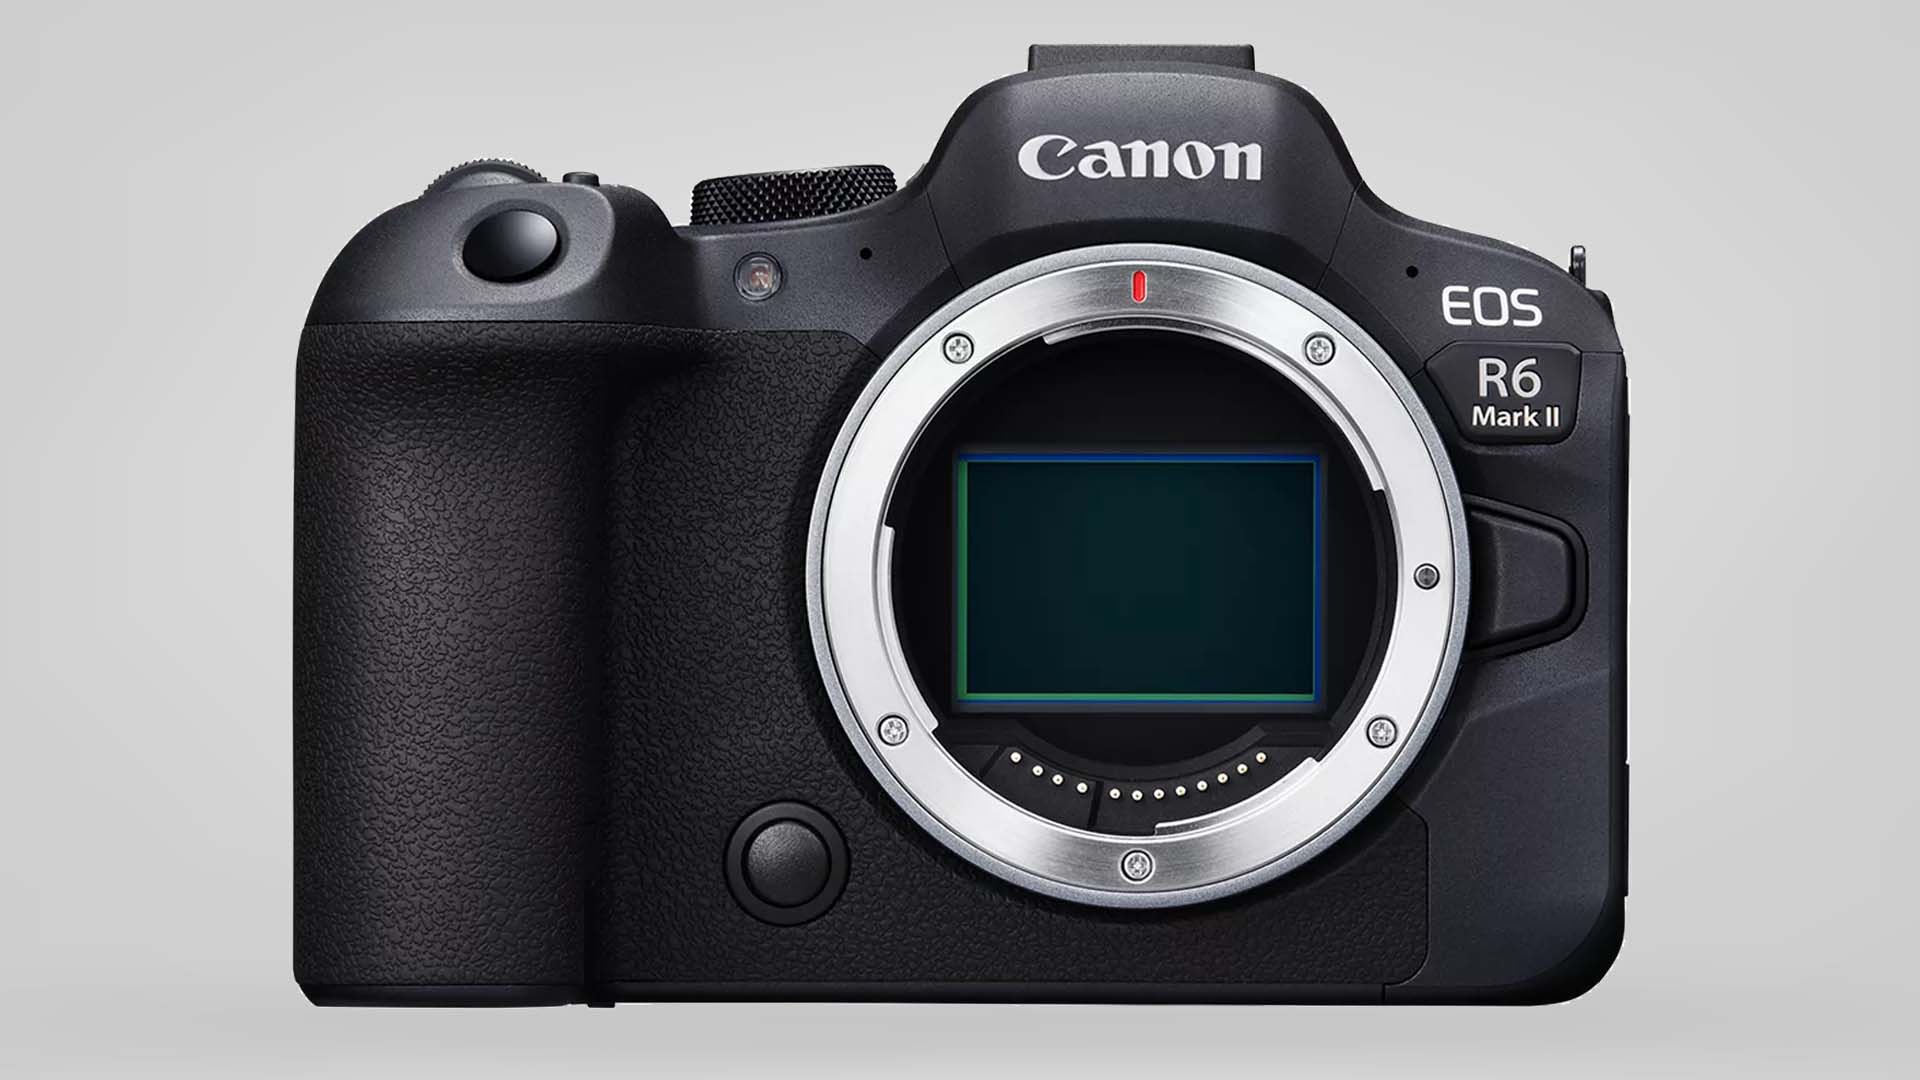 Canon announces fastest EOS R System camera yet, the EOS R6 Mark II